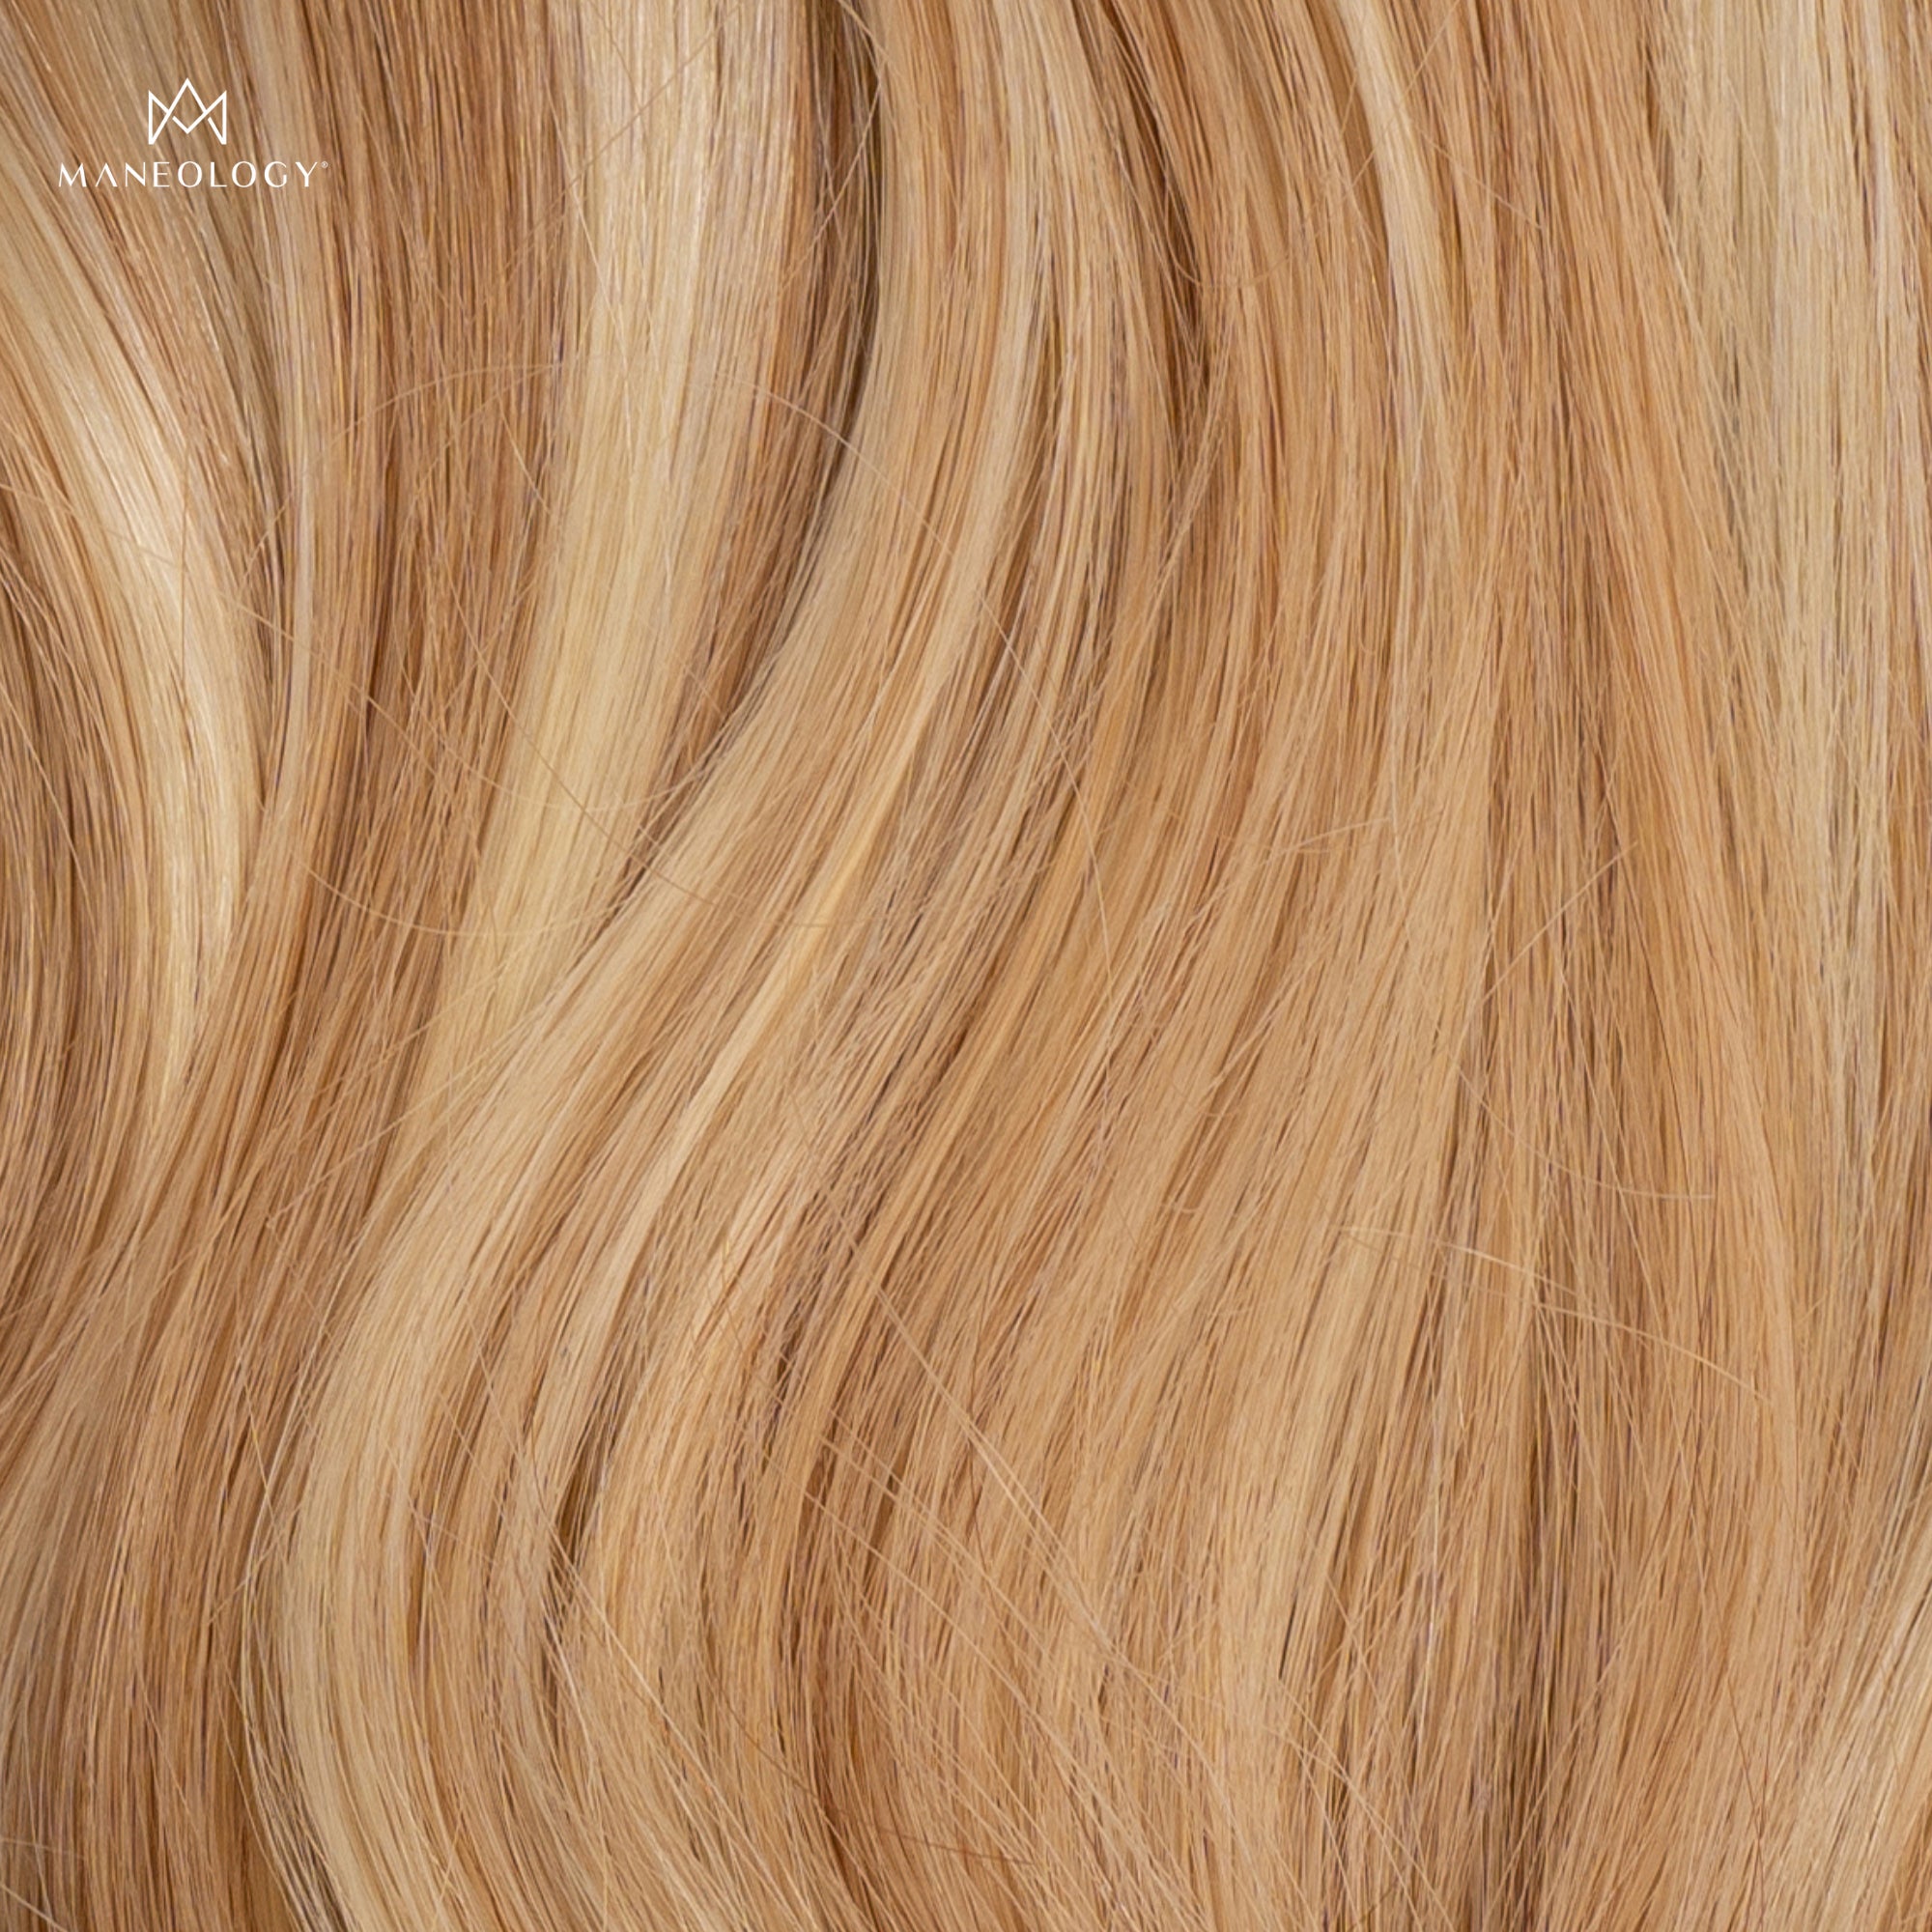 Duchess Elegant Clip-in Hair Extensions 20" Colour P27 613 - Maneology Hair Extensions